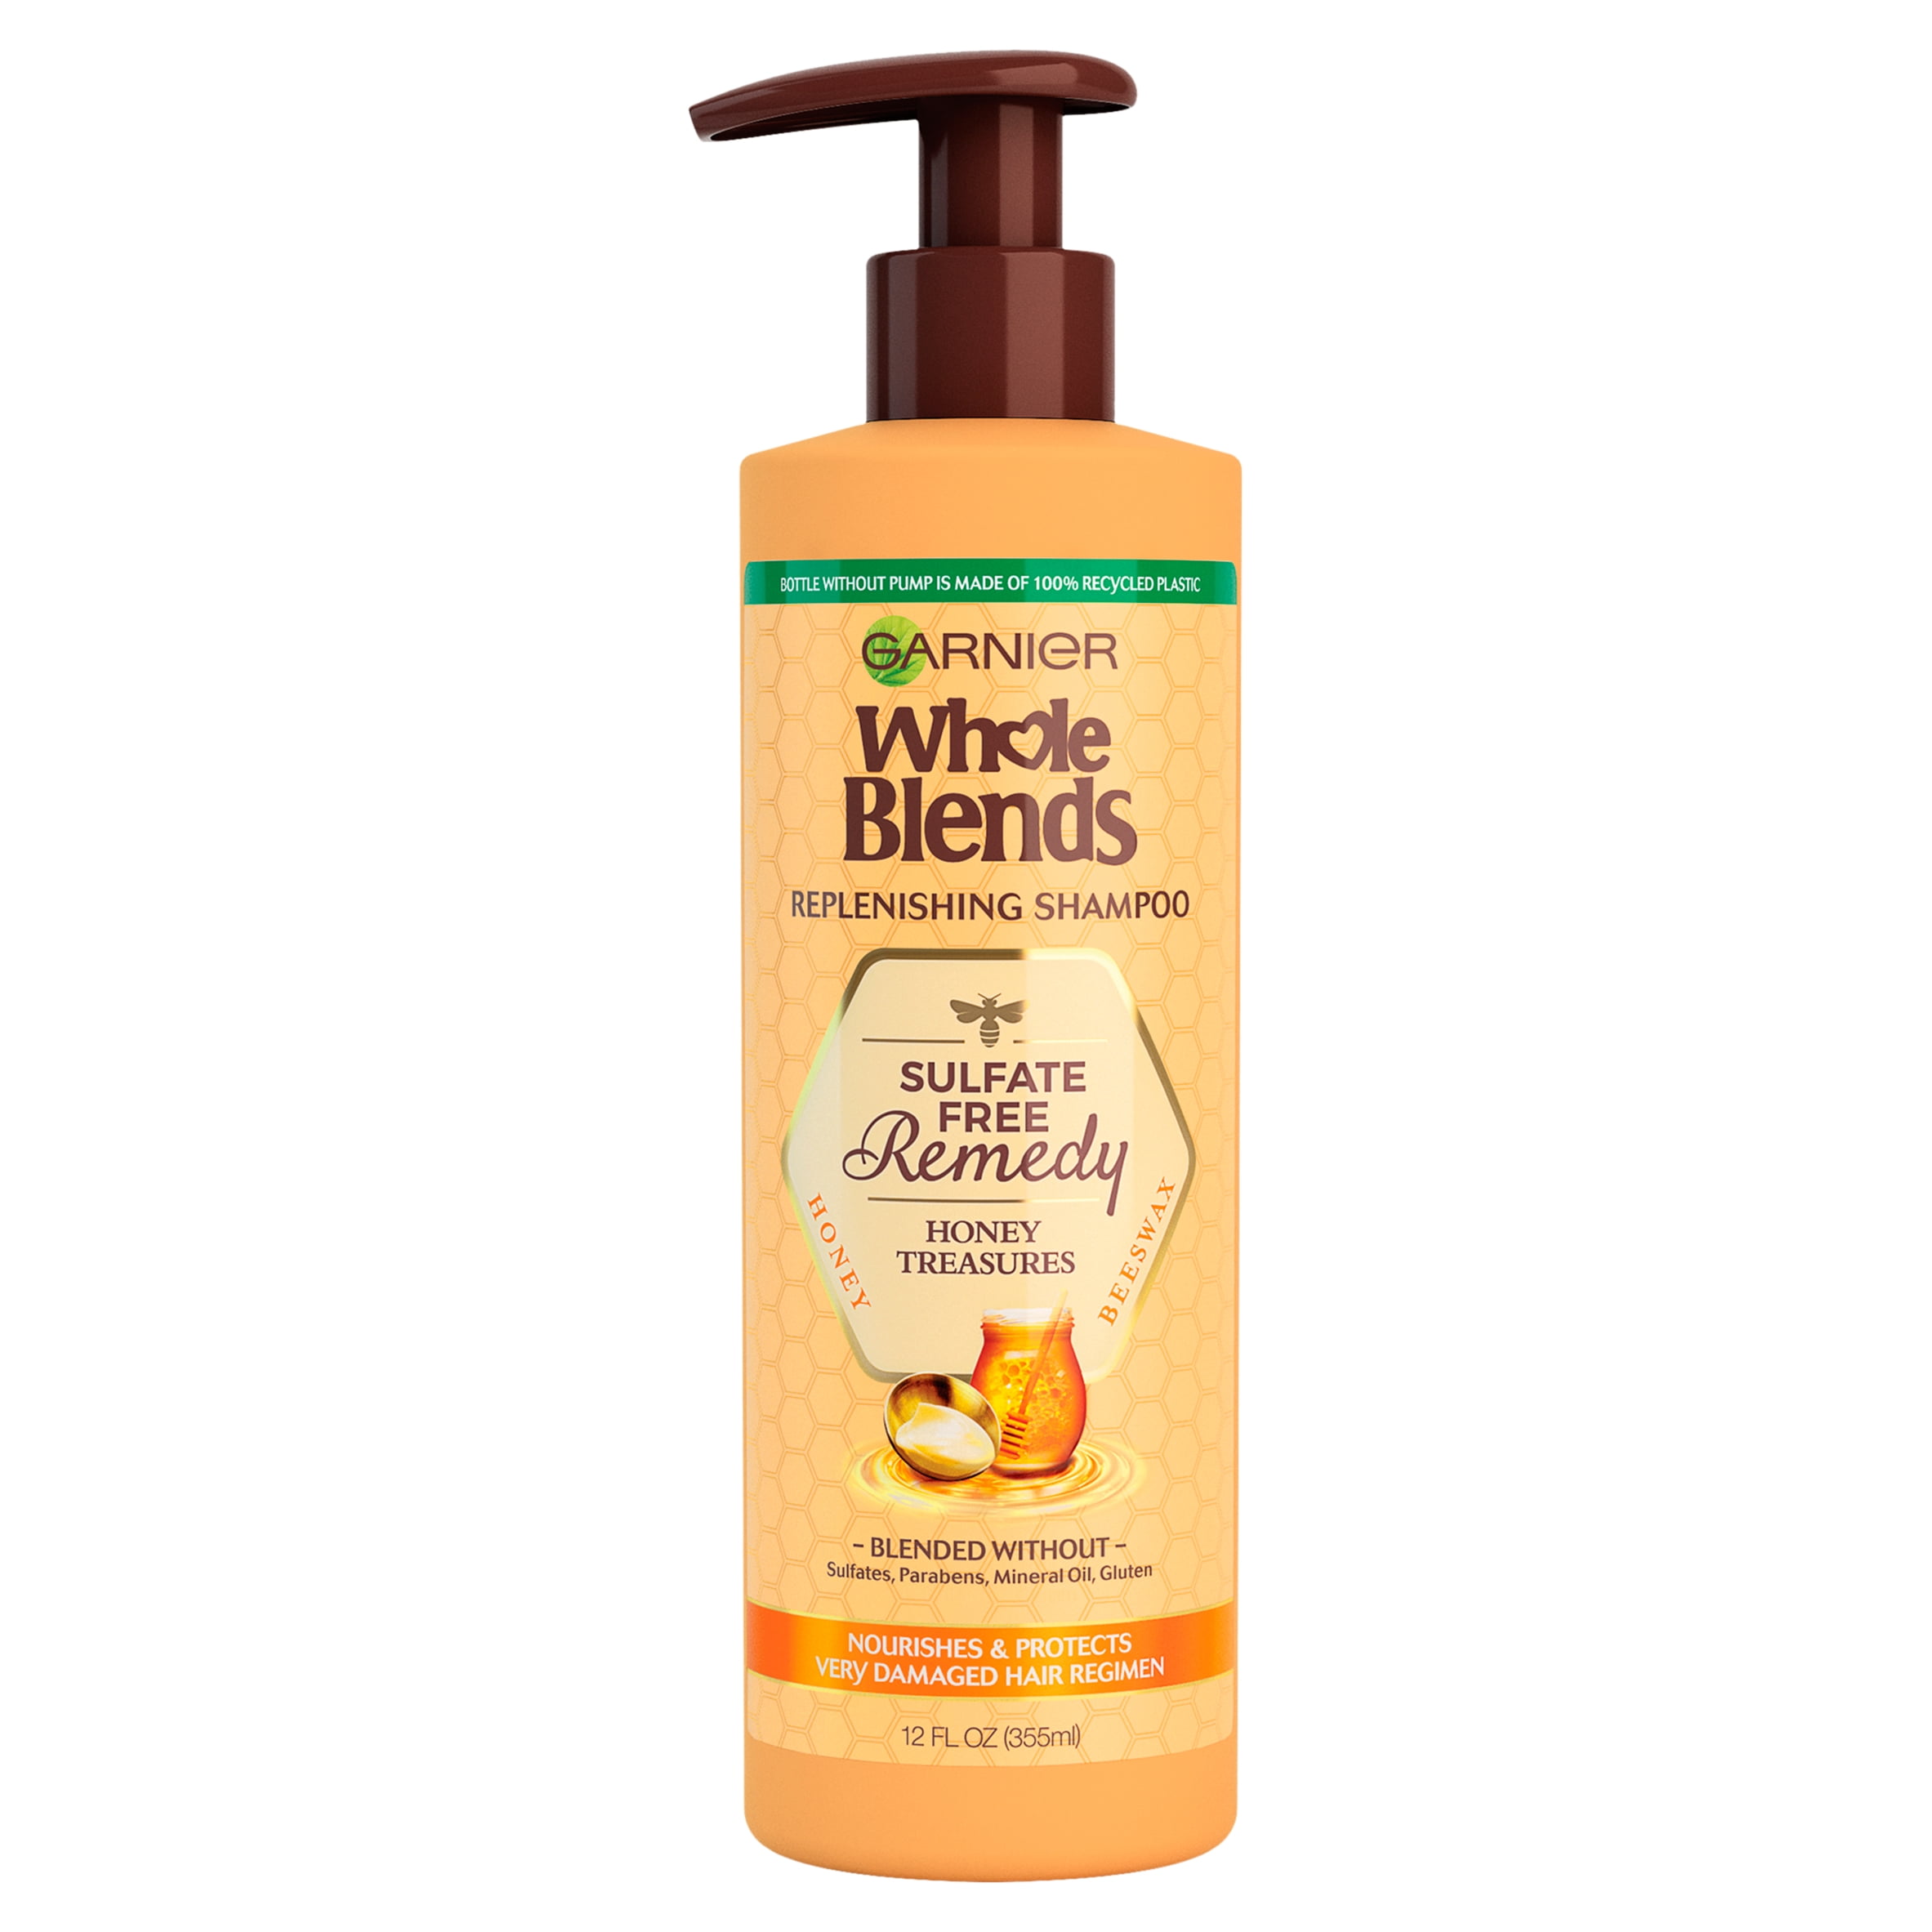 Garnier Whole Blends Sulfate Free Remedy Replenishing Shampoo with Honey for Very Damaged Hair, 12 fl oz